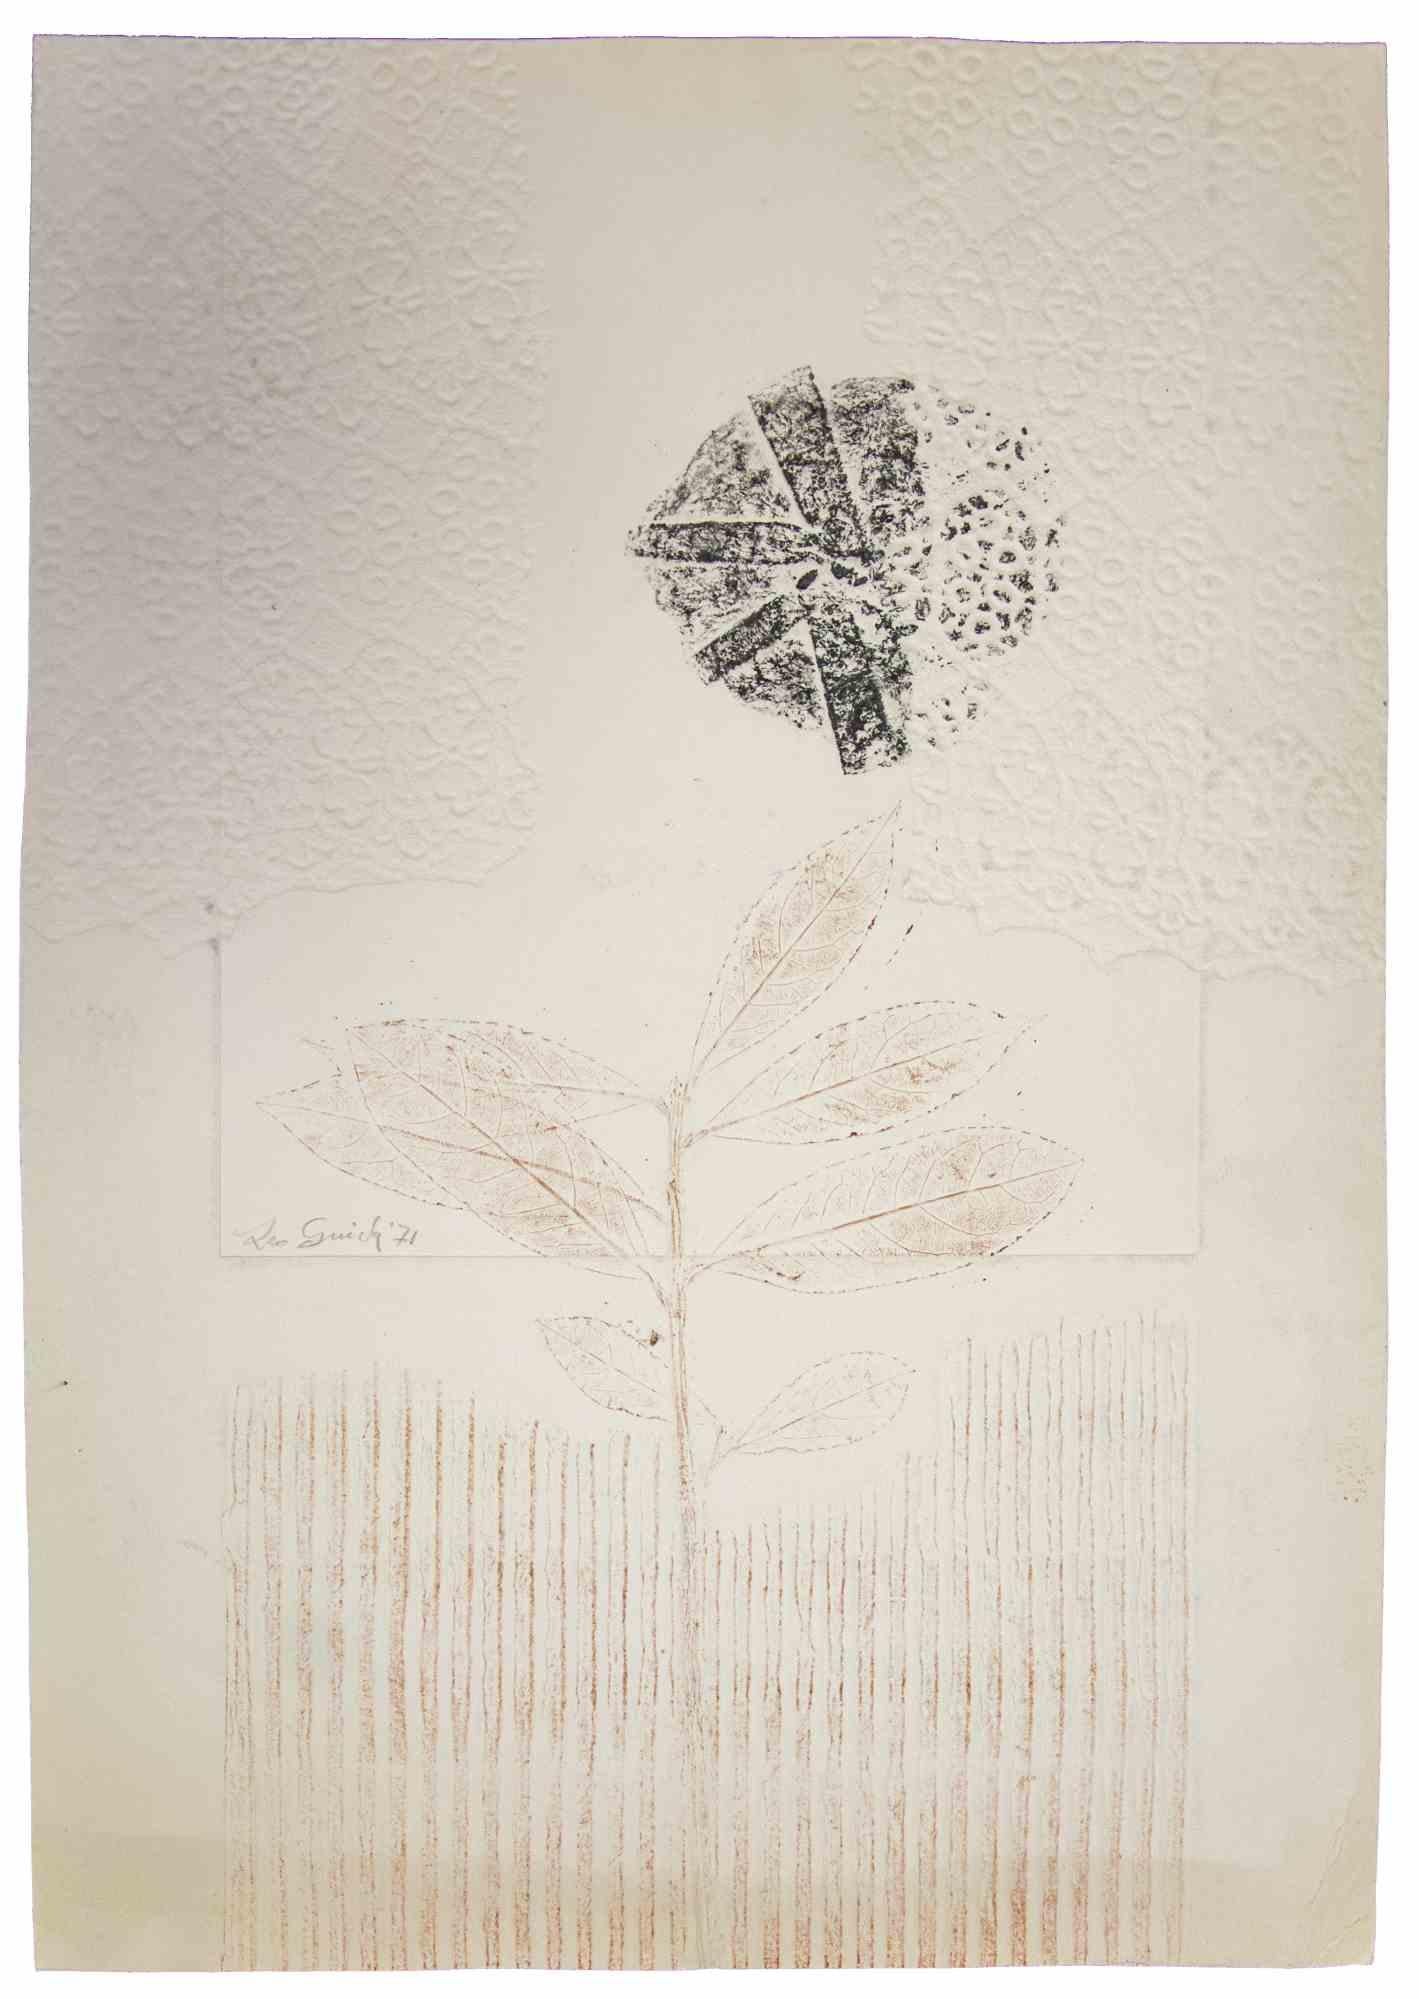 Floral Print  is an original artwork realized in 1971 by the italian Contemporary artist  Leo Guida  (1992 - 2017).

Etching, drypoint and embossing on ivory-colored cardboard.

Hand-signed and dated on the lower margin. 

In this artwork is